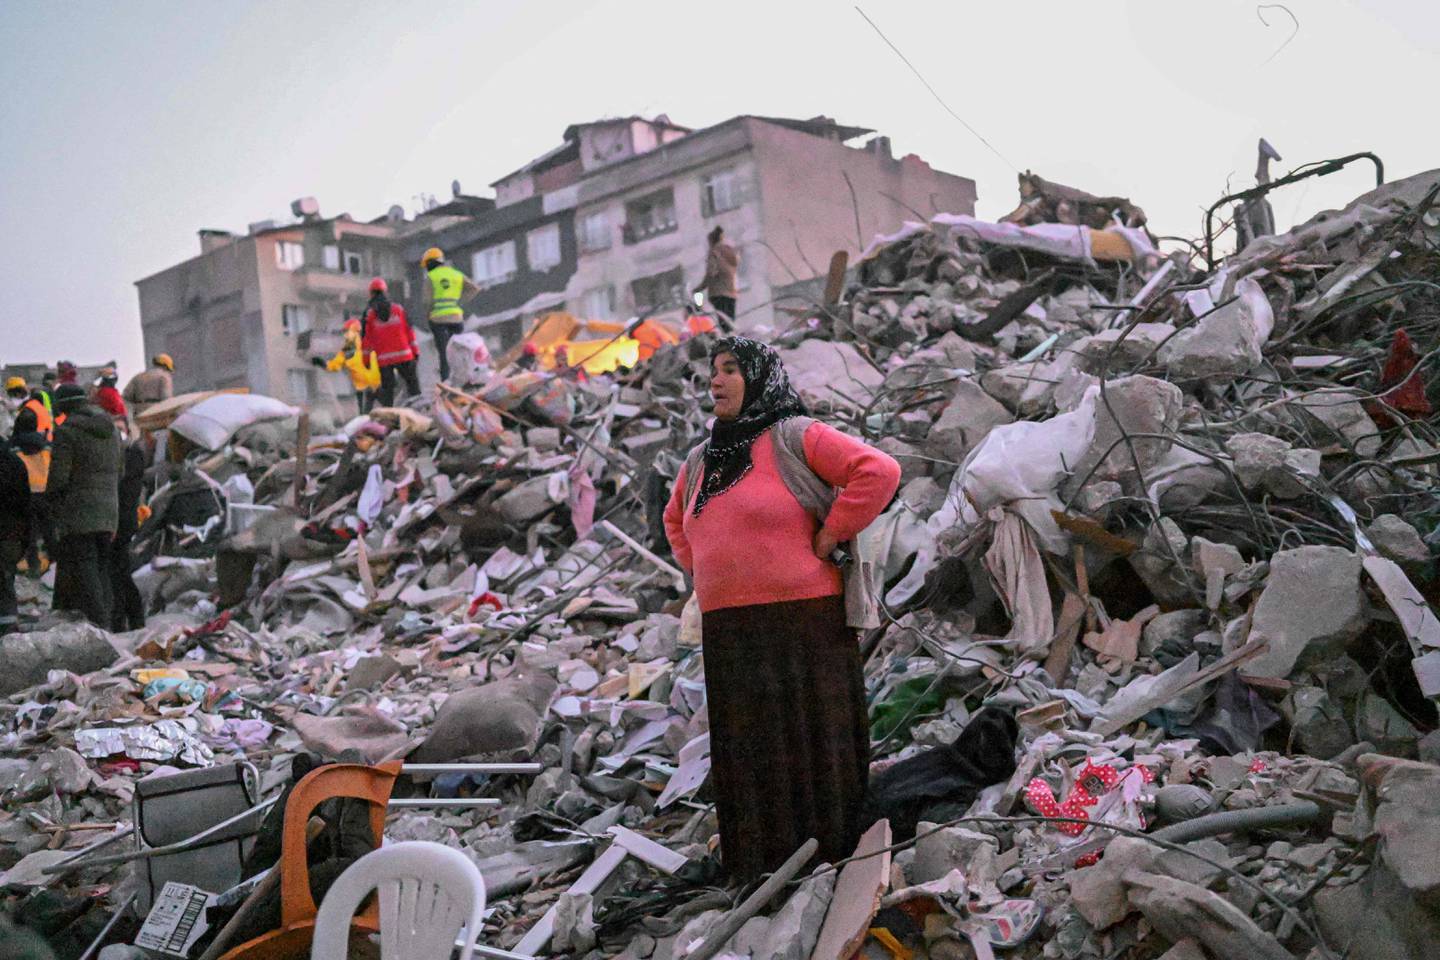 A survivor waits for rescuers to find her relatives trapped under the rubble, in Hatay, Turkey. AFP